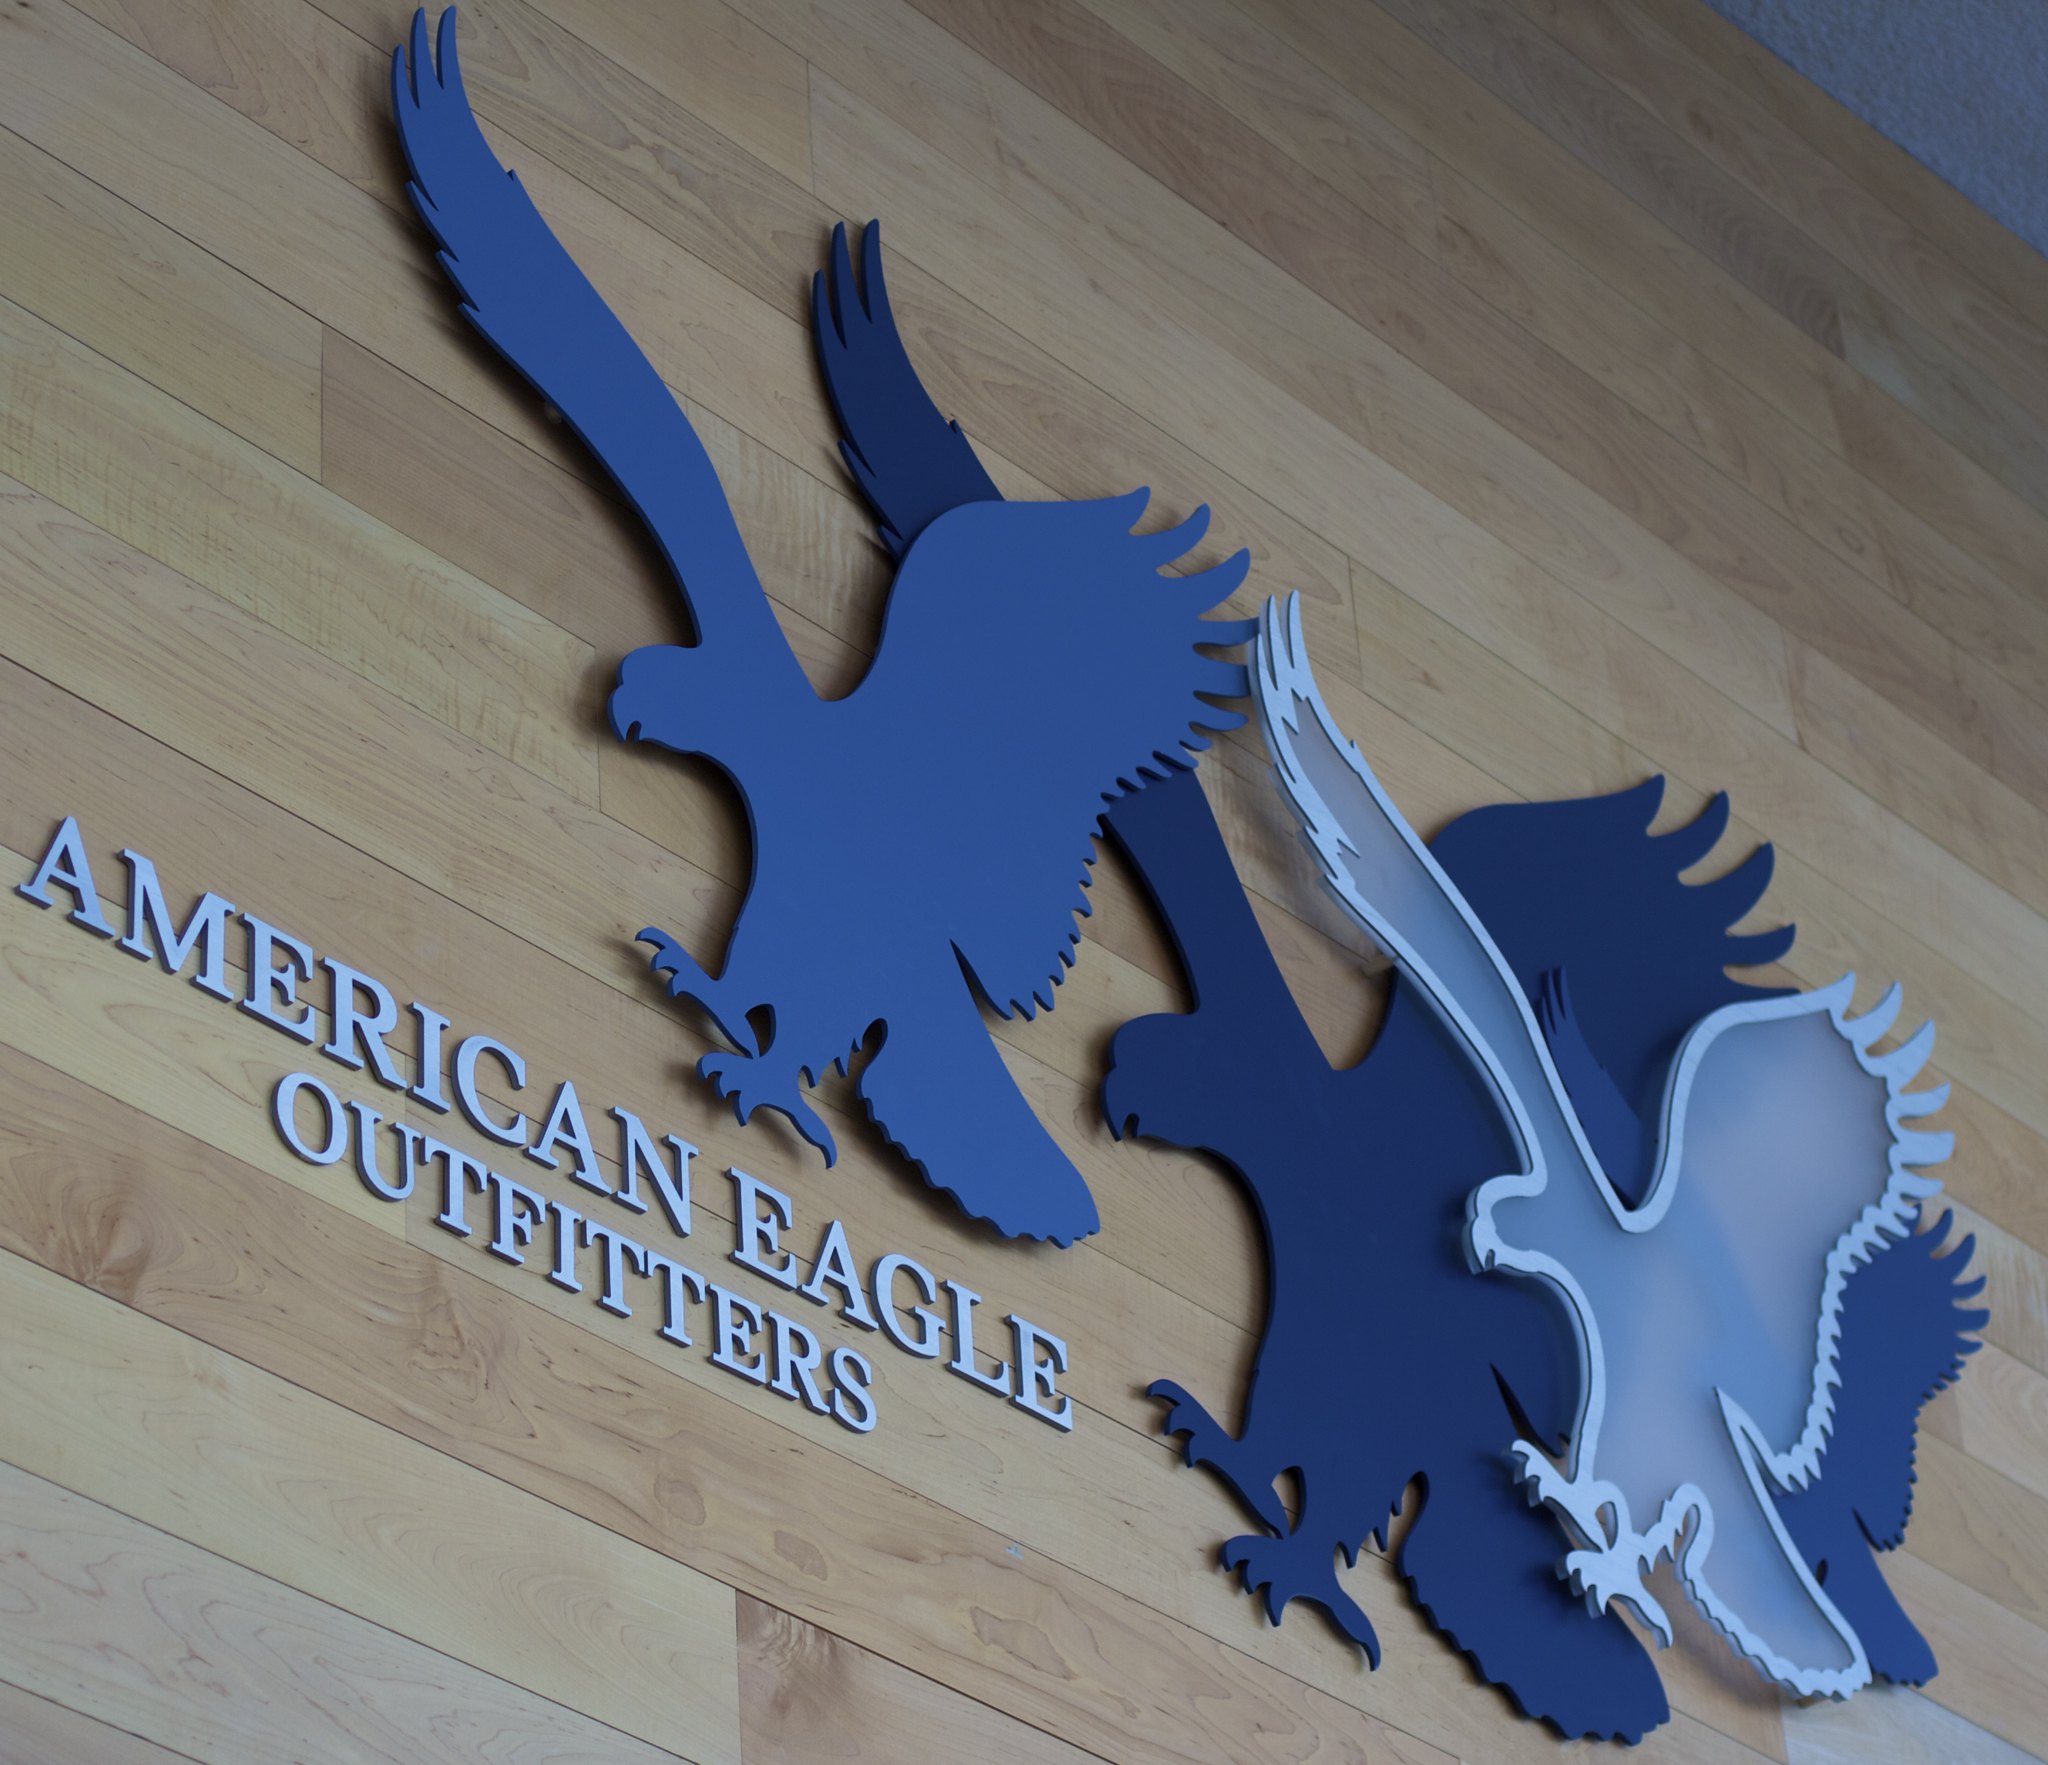 Local American Eagle Outfitters recognized for response to antisemitism